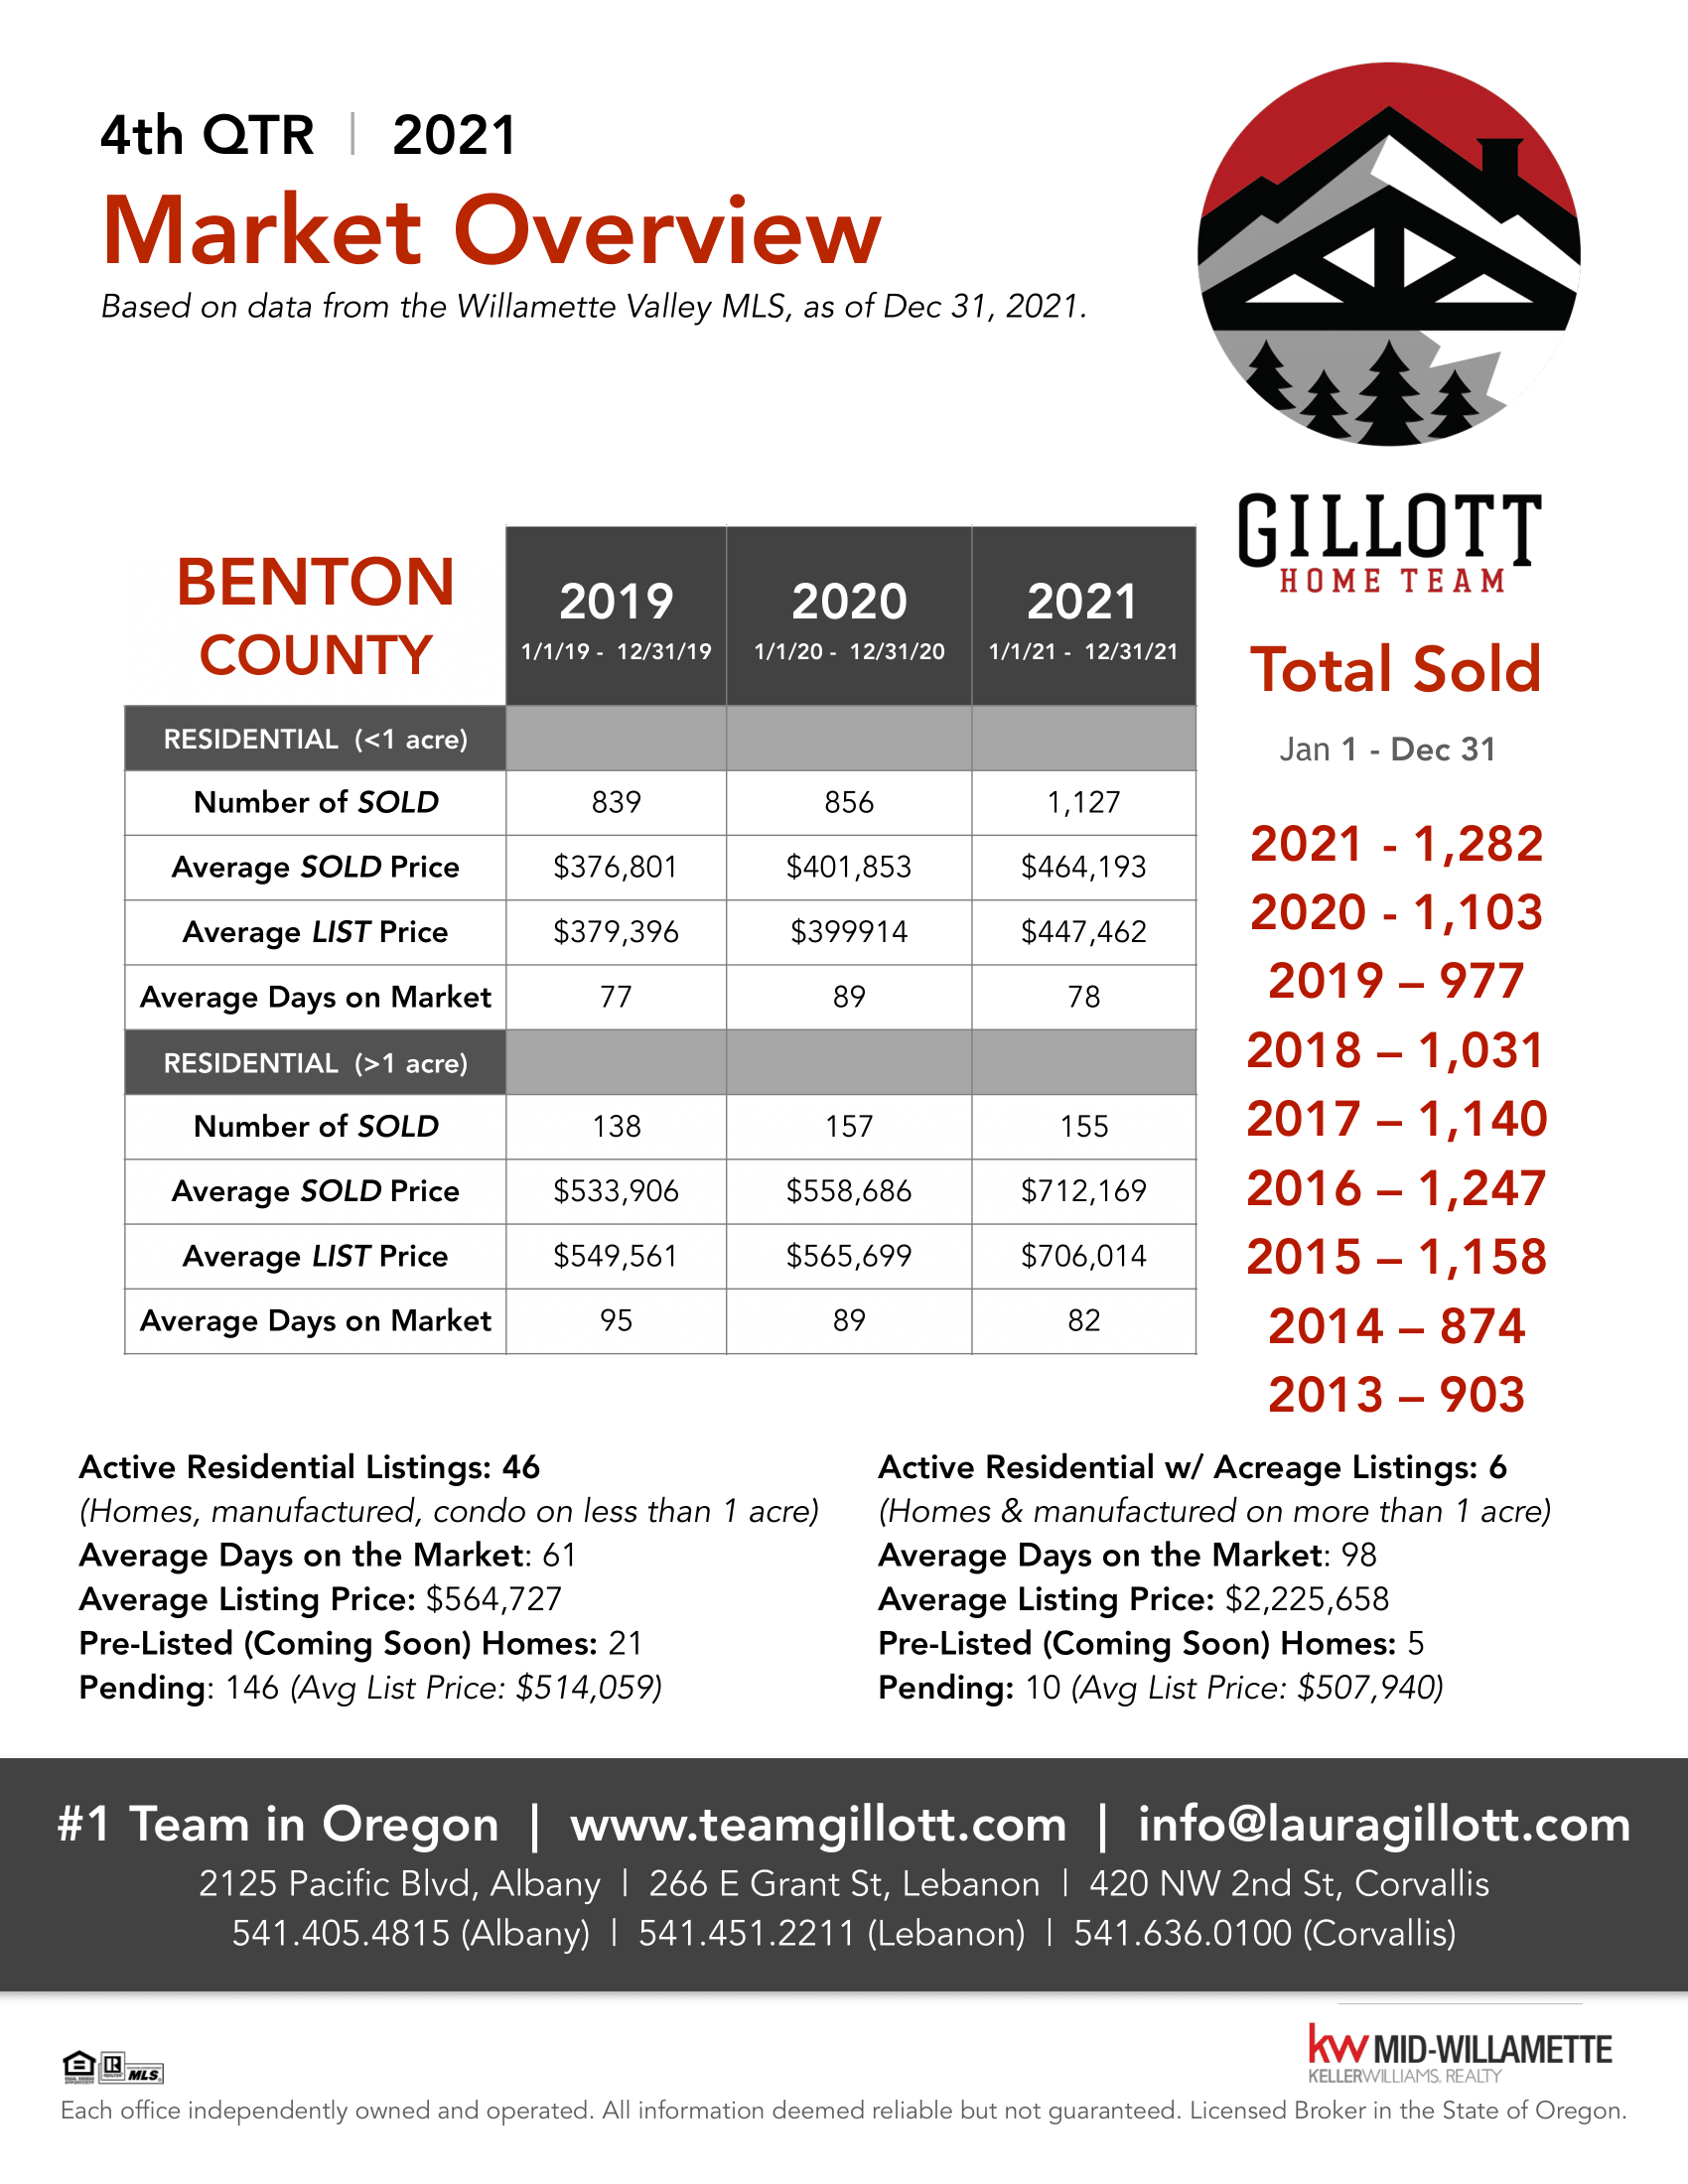 4th Qtr Benton Co. 2021 PDF updated-1.png